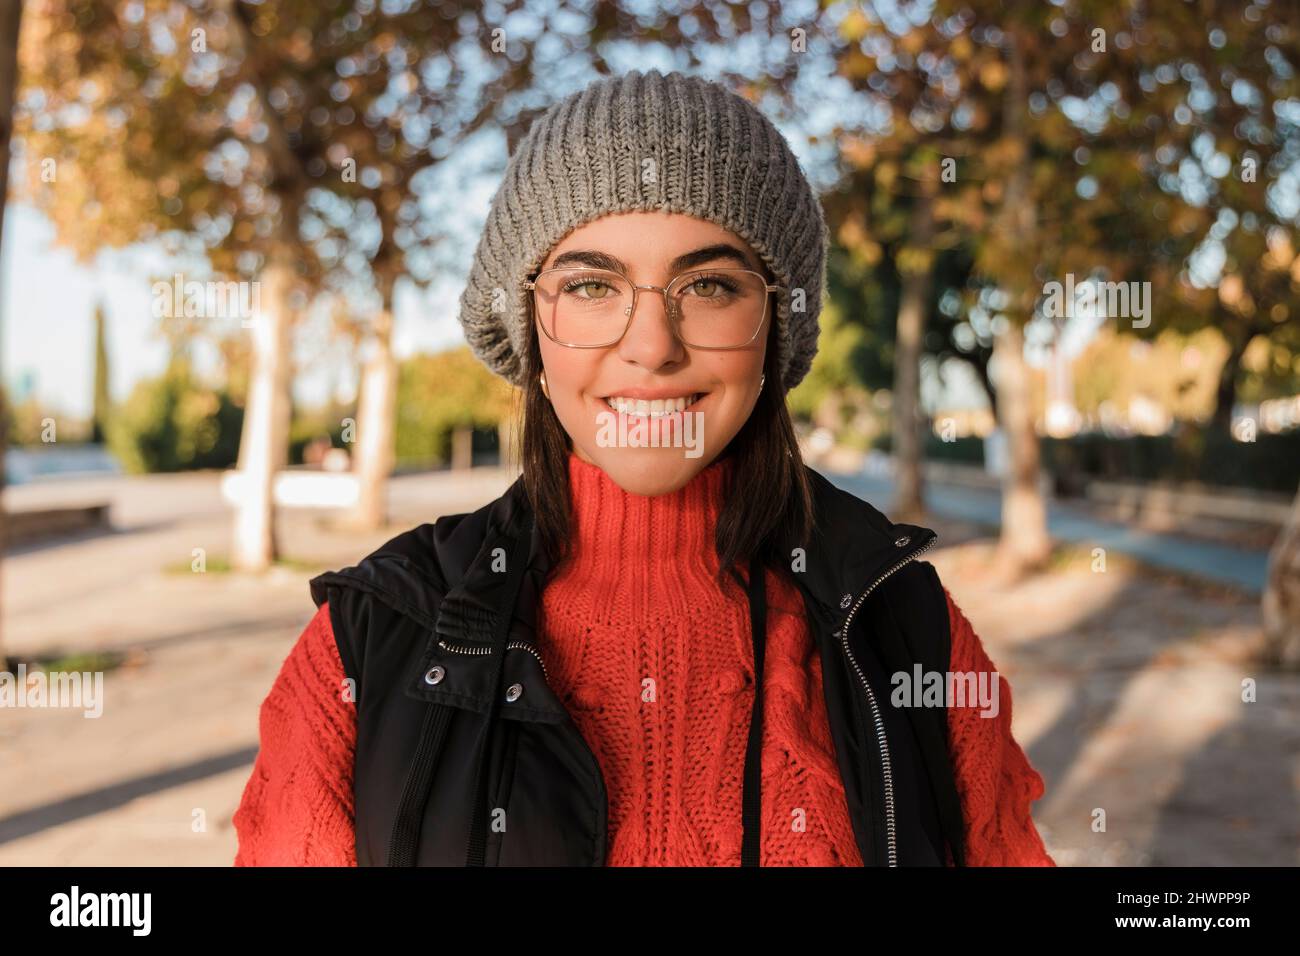 Happy young woman wearing knit hat and eyeglasses Stock Photo